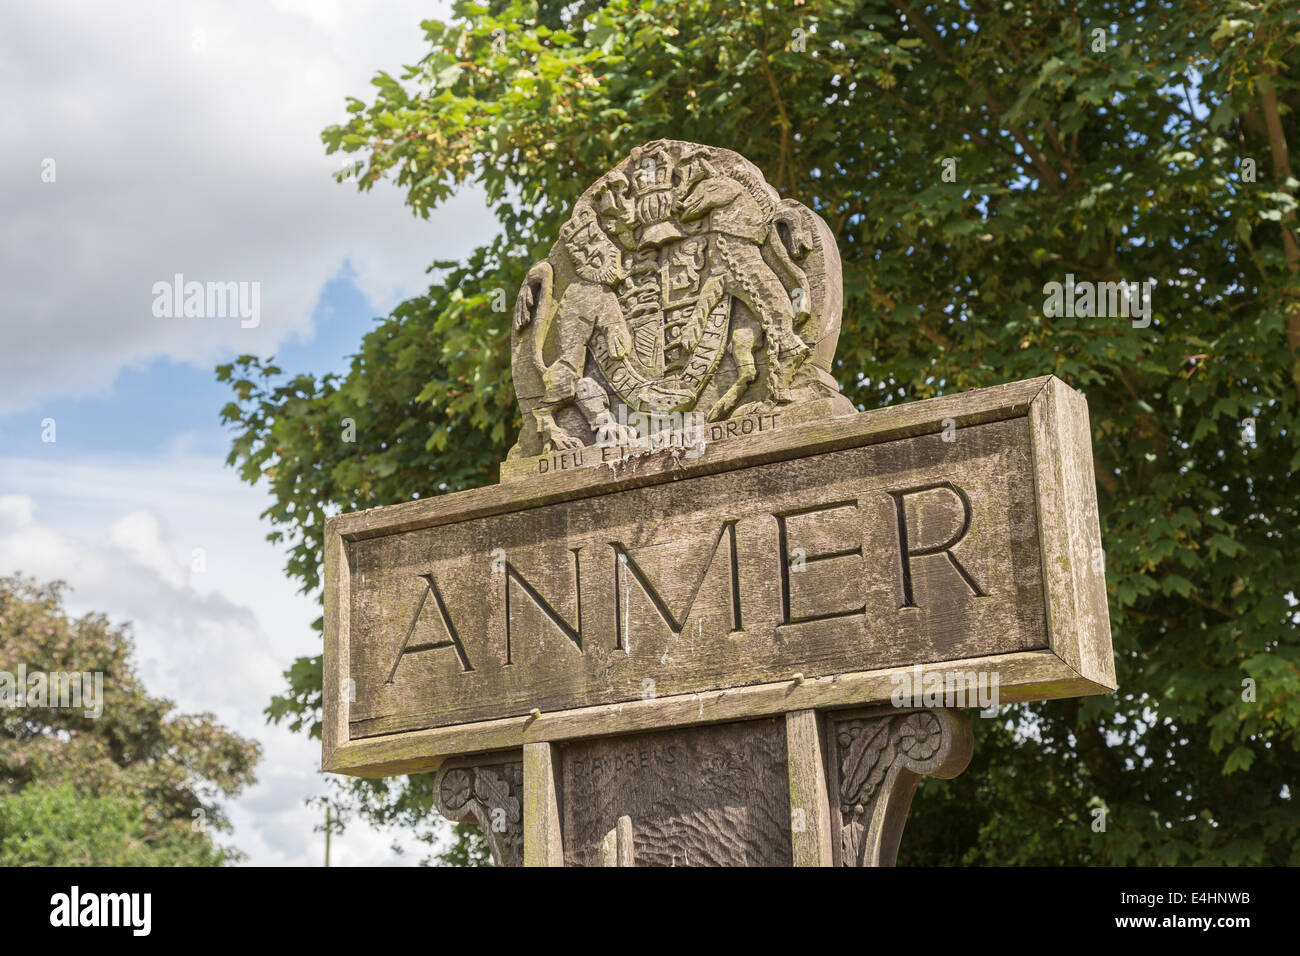 Wooden place name sign with the name of the village of Anmer, near Sandringham, Norfolk, UK, home of the Duke and Duchess of Cambridge Stock Photo